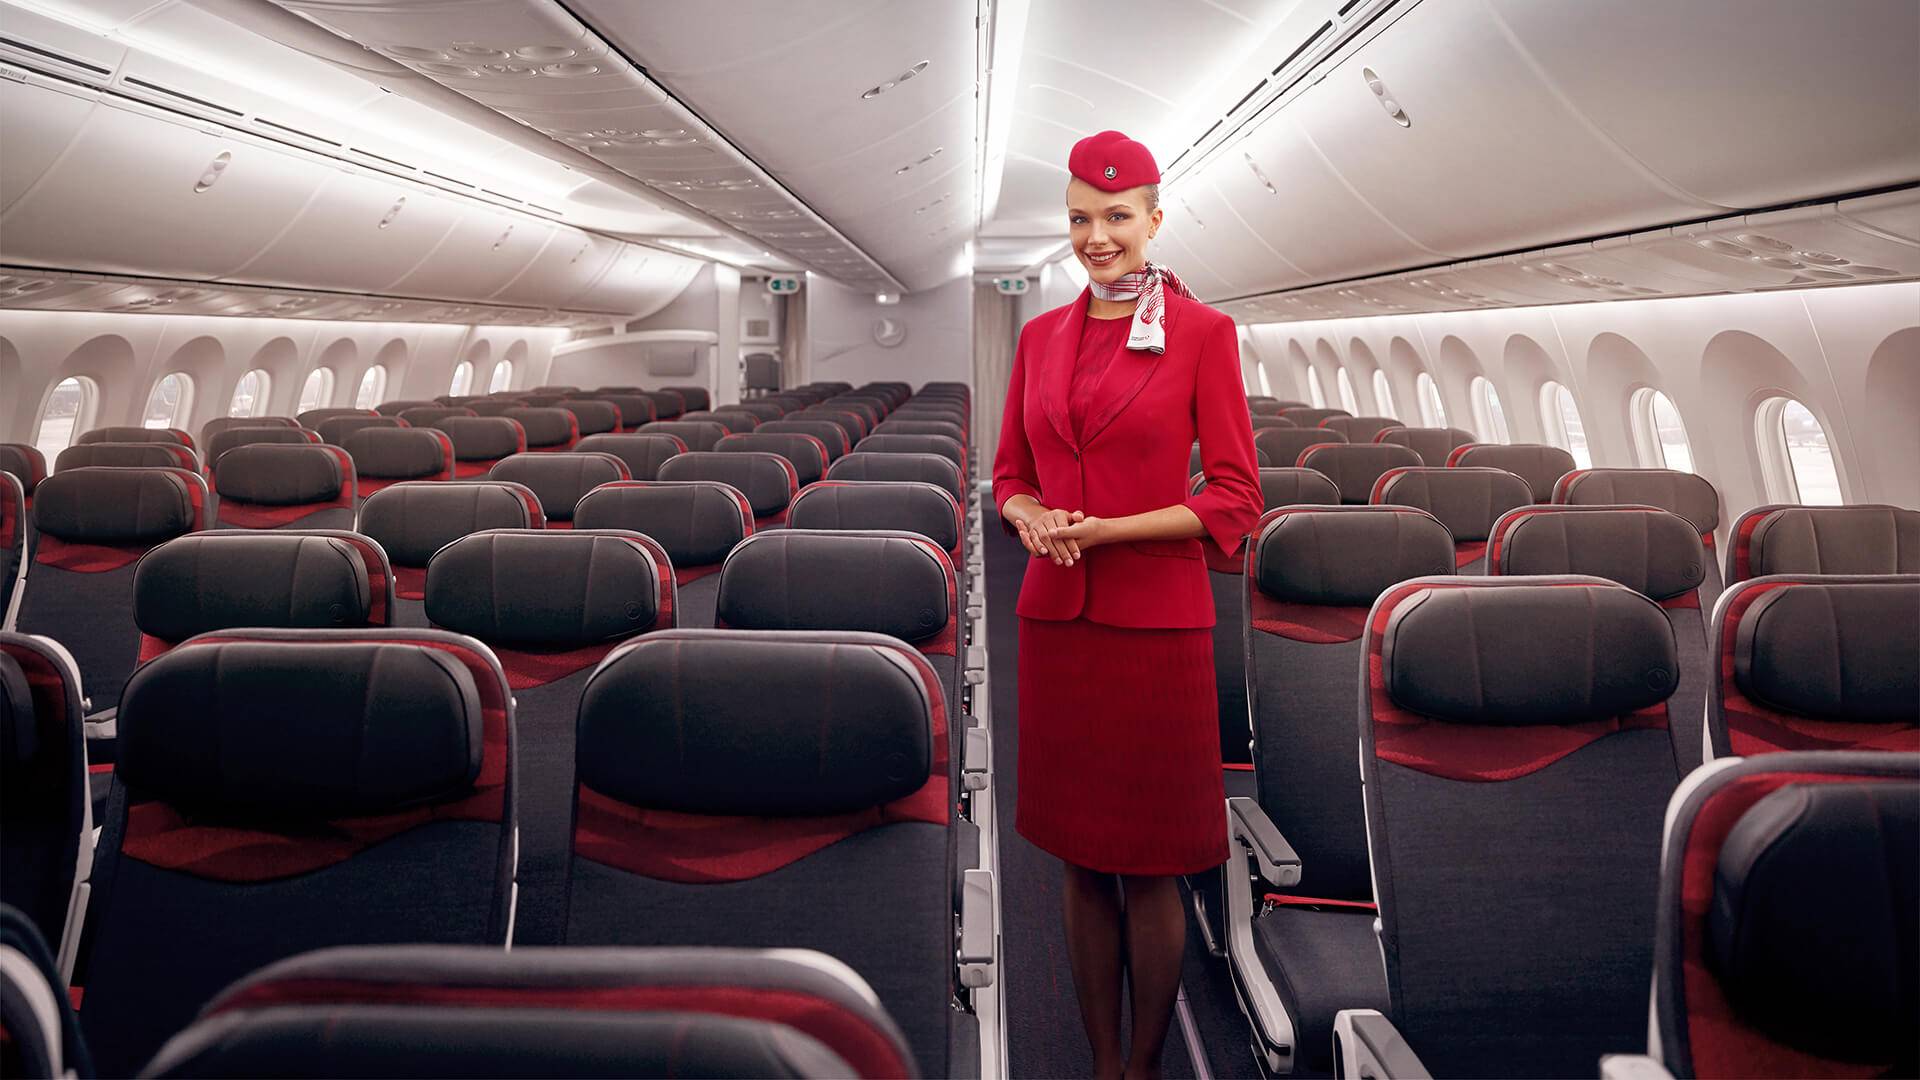 Turkish Airlines Economy Class Cabin with crew